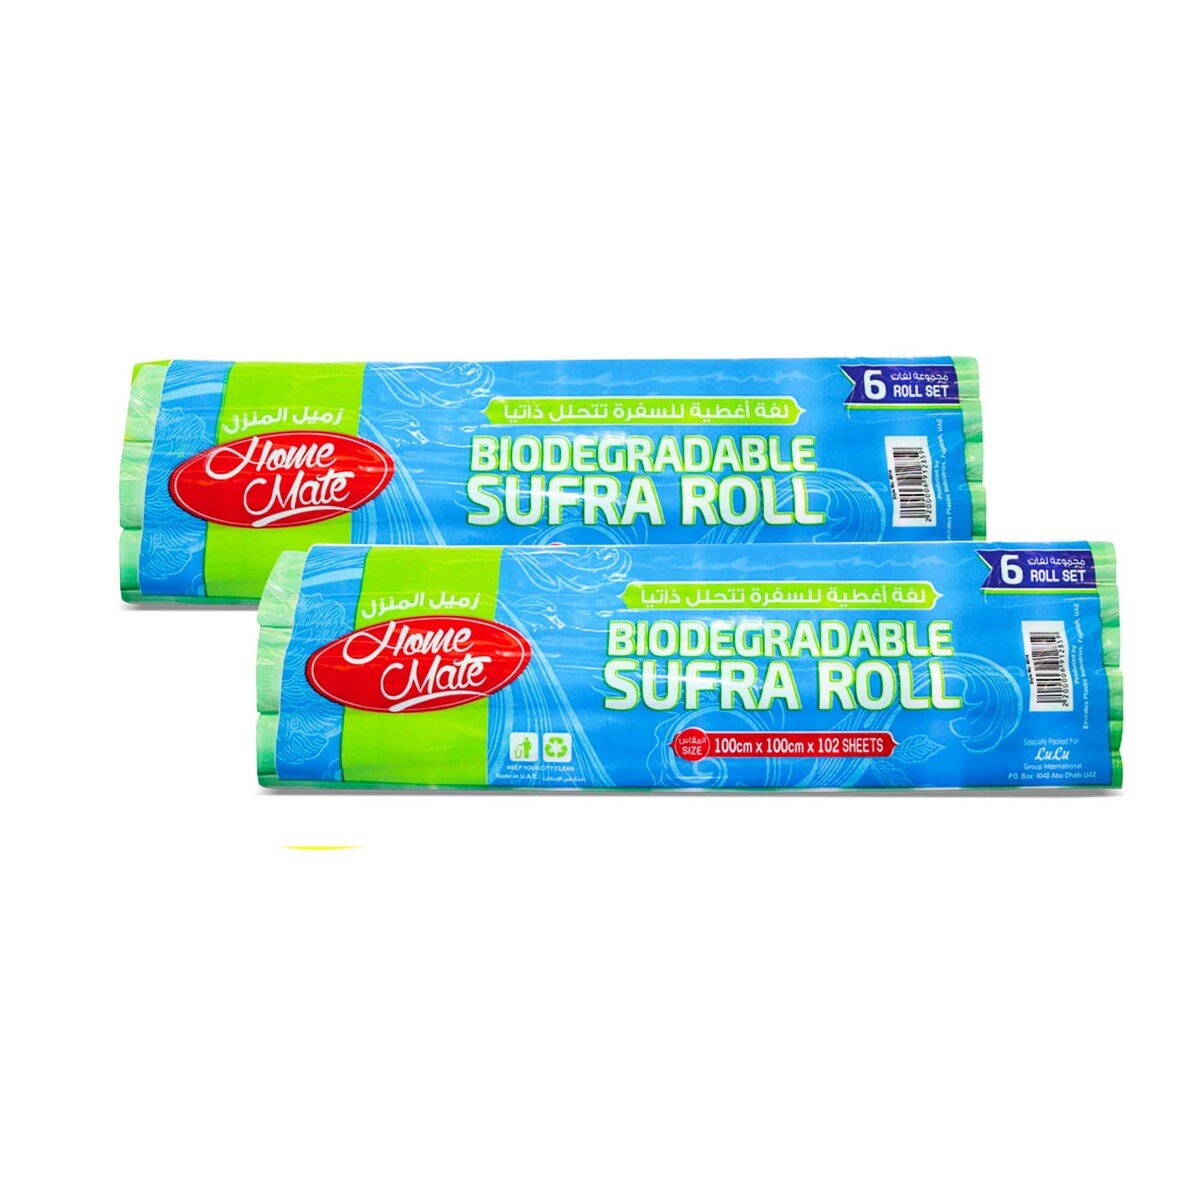 Home Mate Biodegradable Sufra Roll 2 x  6pcs